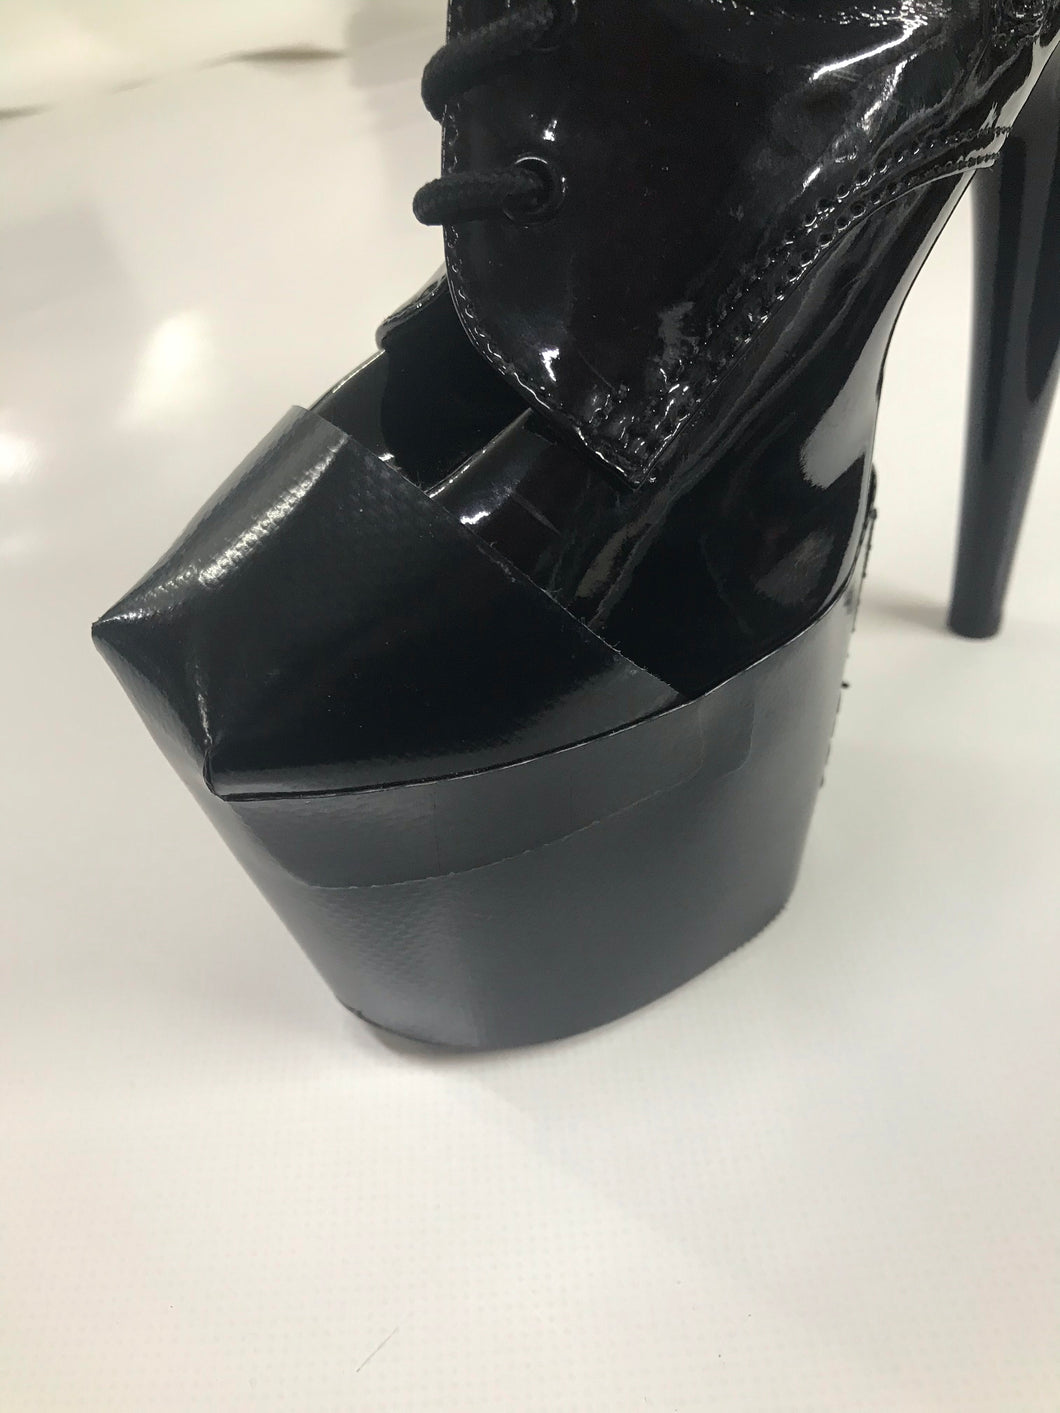 Long lasting Black Shoe Protectors for Pleaser style Shoes by Pole Bites